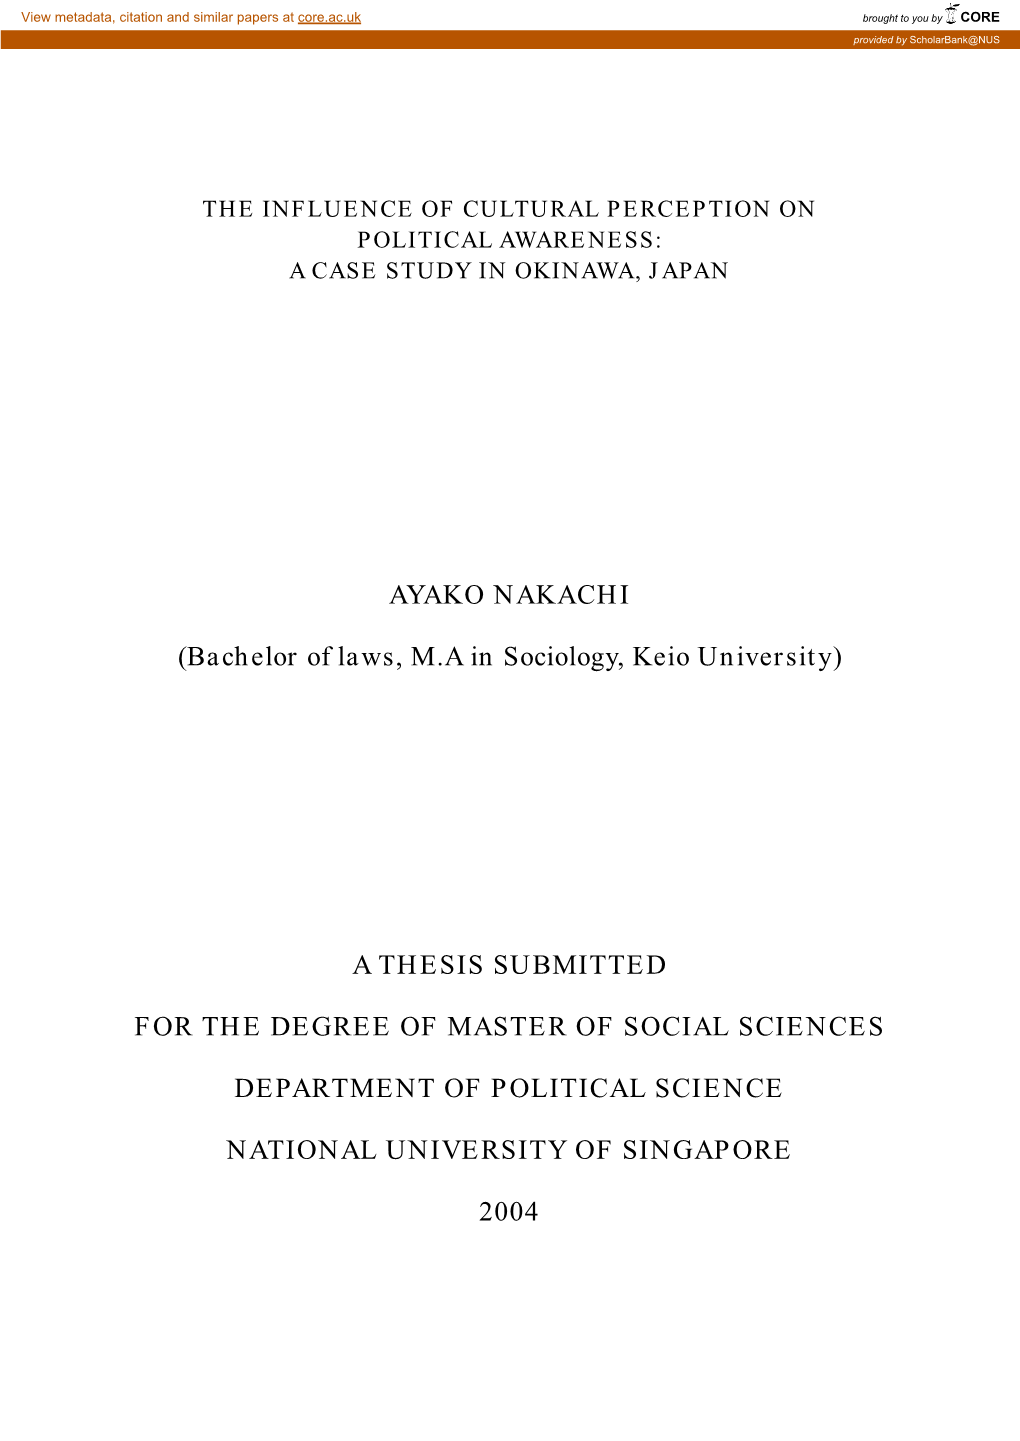 AYAKO NAKACHI (Bachelor of Laws, M.A in Sociology, Keio University) a THESIS SUBMITTED for the DEGREE of MASTER of SOCIAL SCIENC